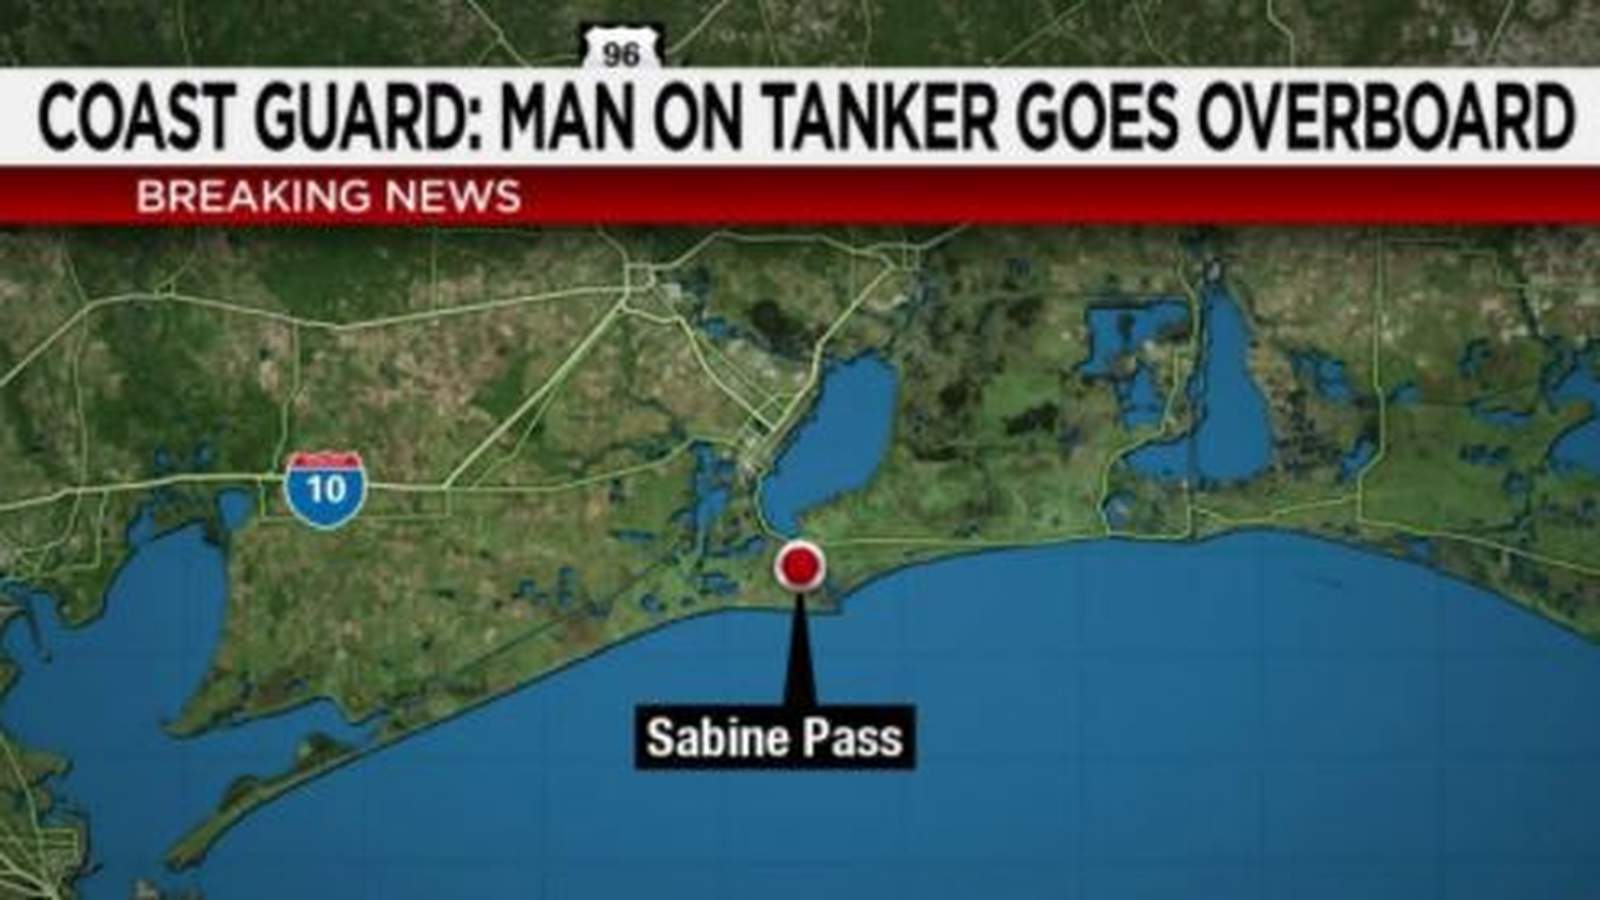 Search underway for man who fell from tanker vessel near Sabine Pass, Coast Guard says